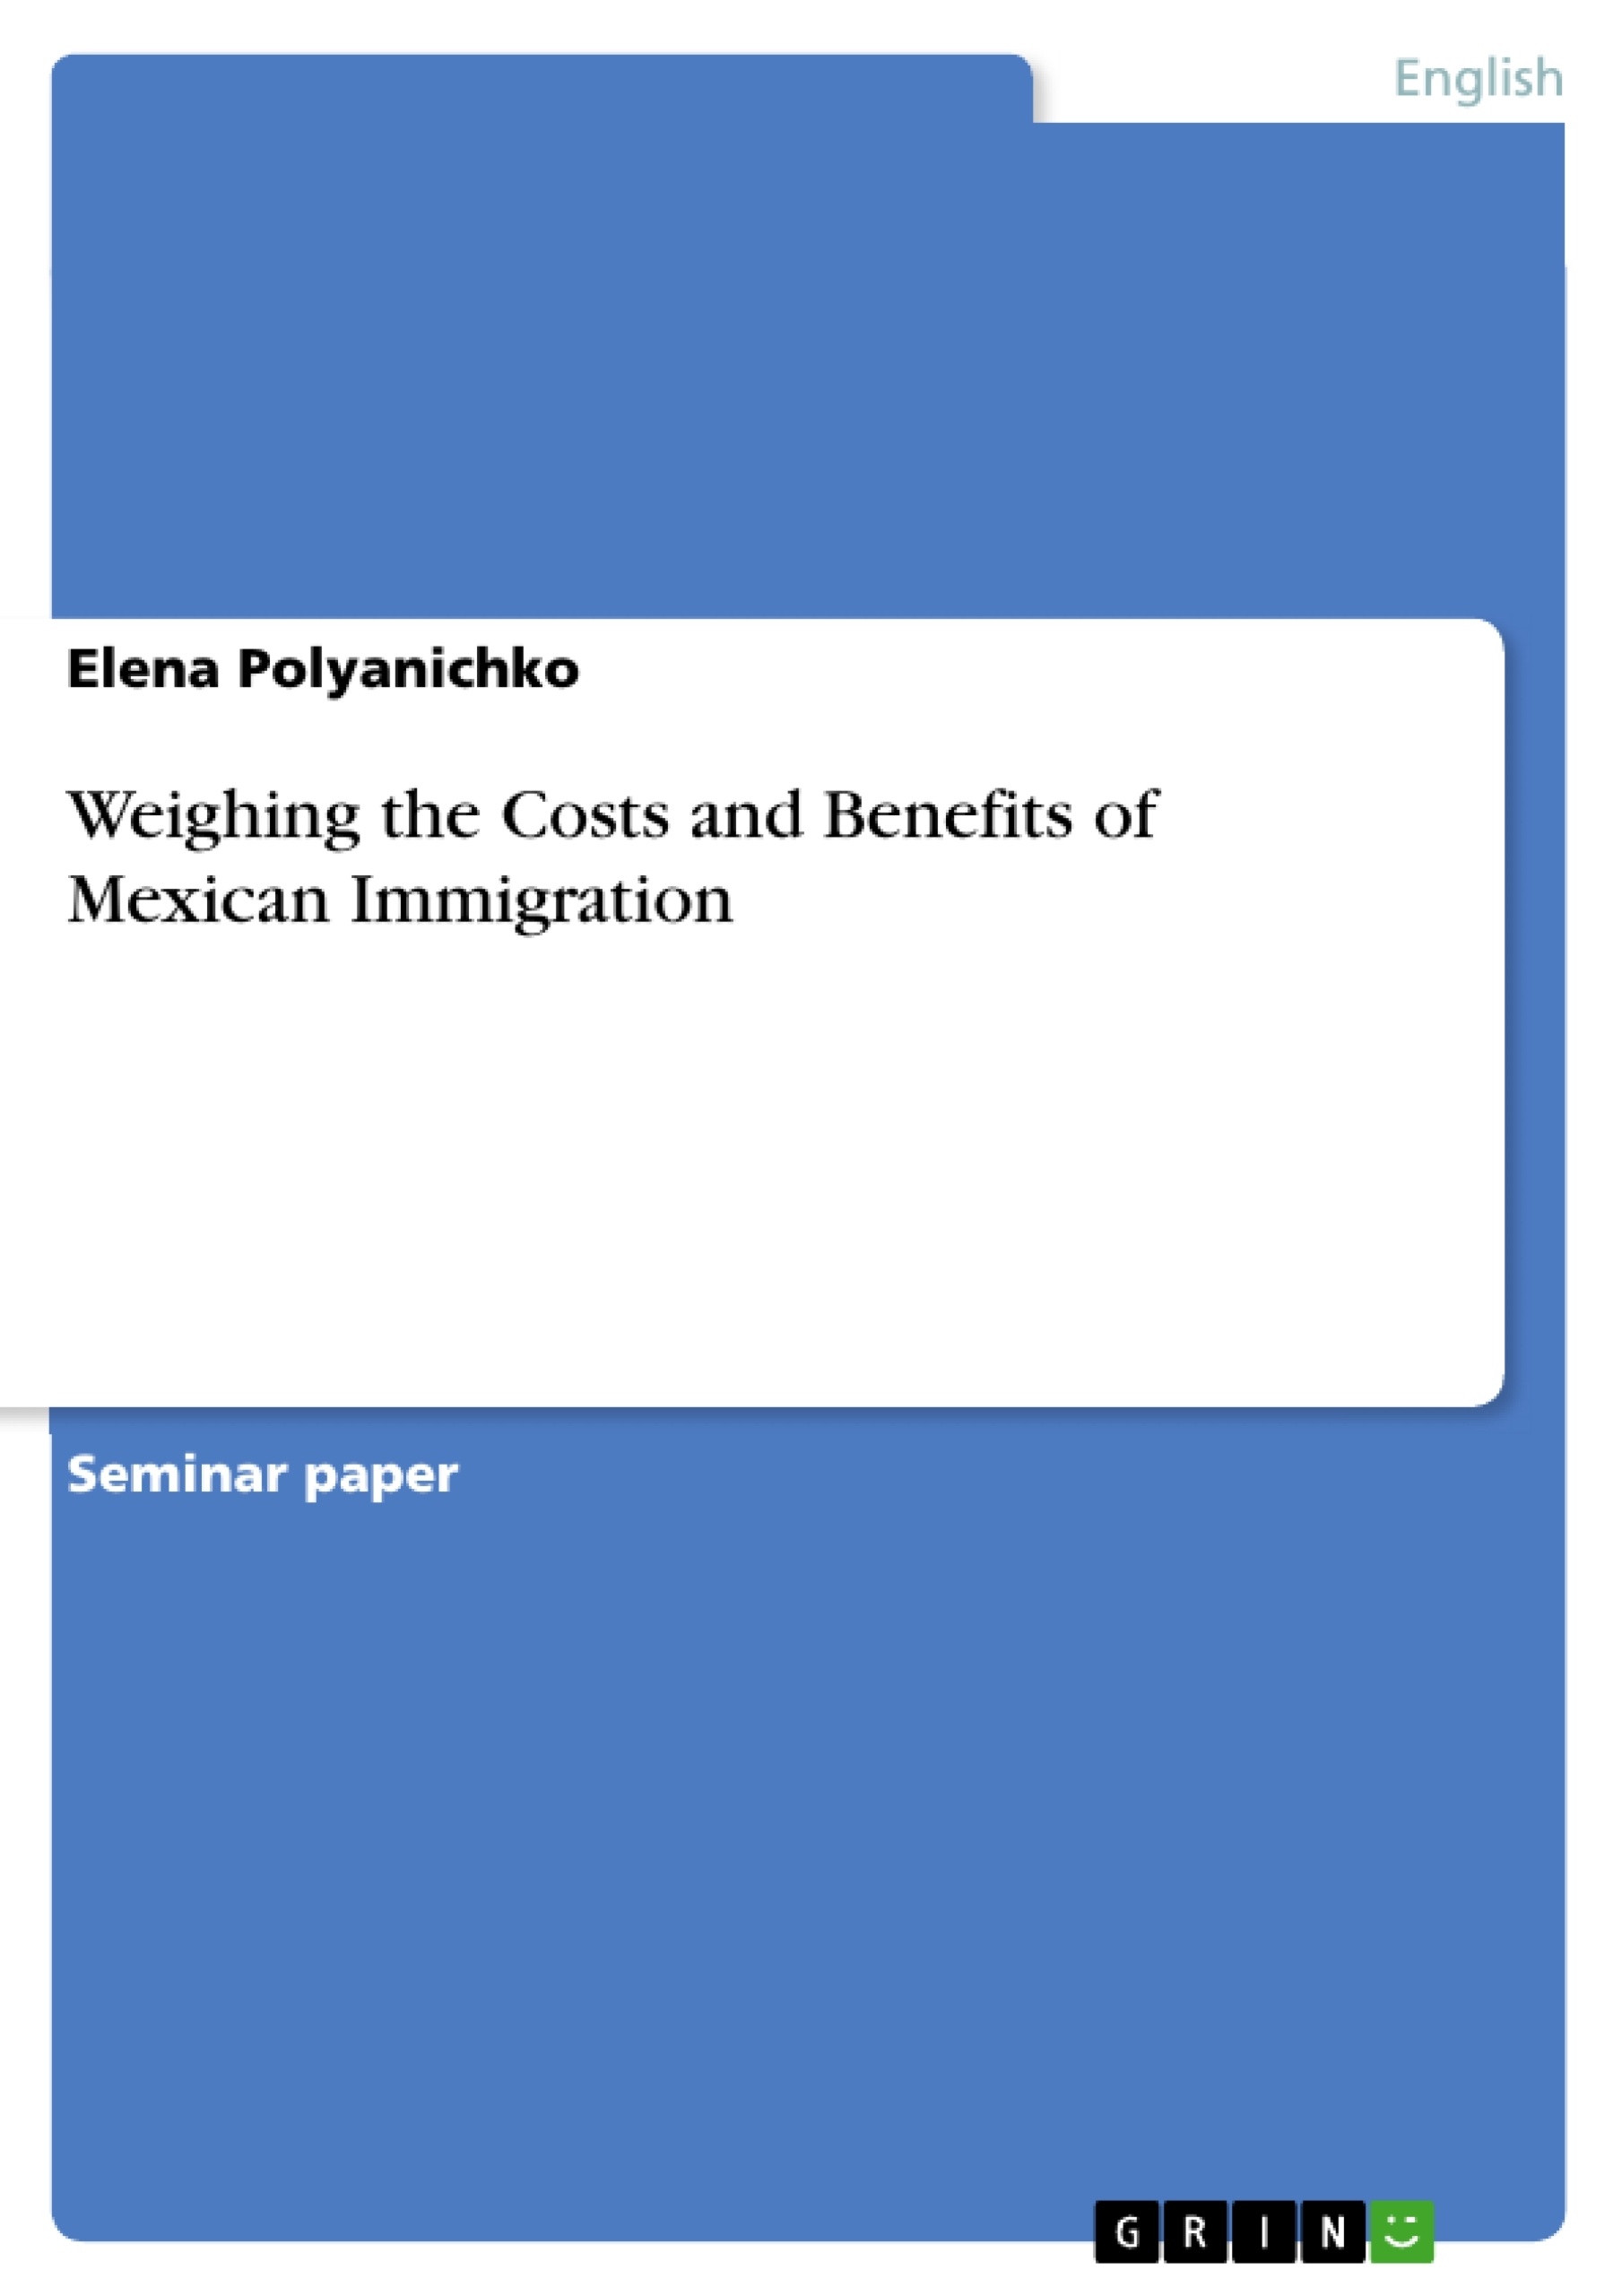 Title: Weighing the Costs and Benefits of Mexican Immigration